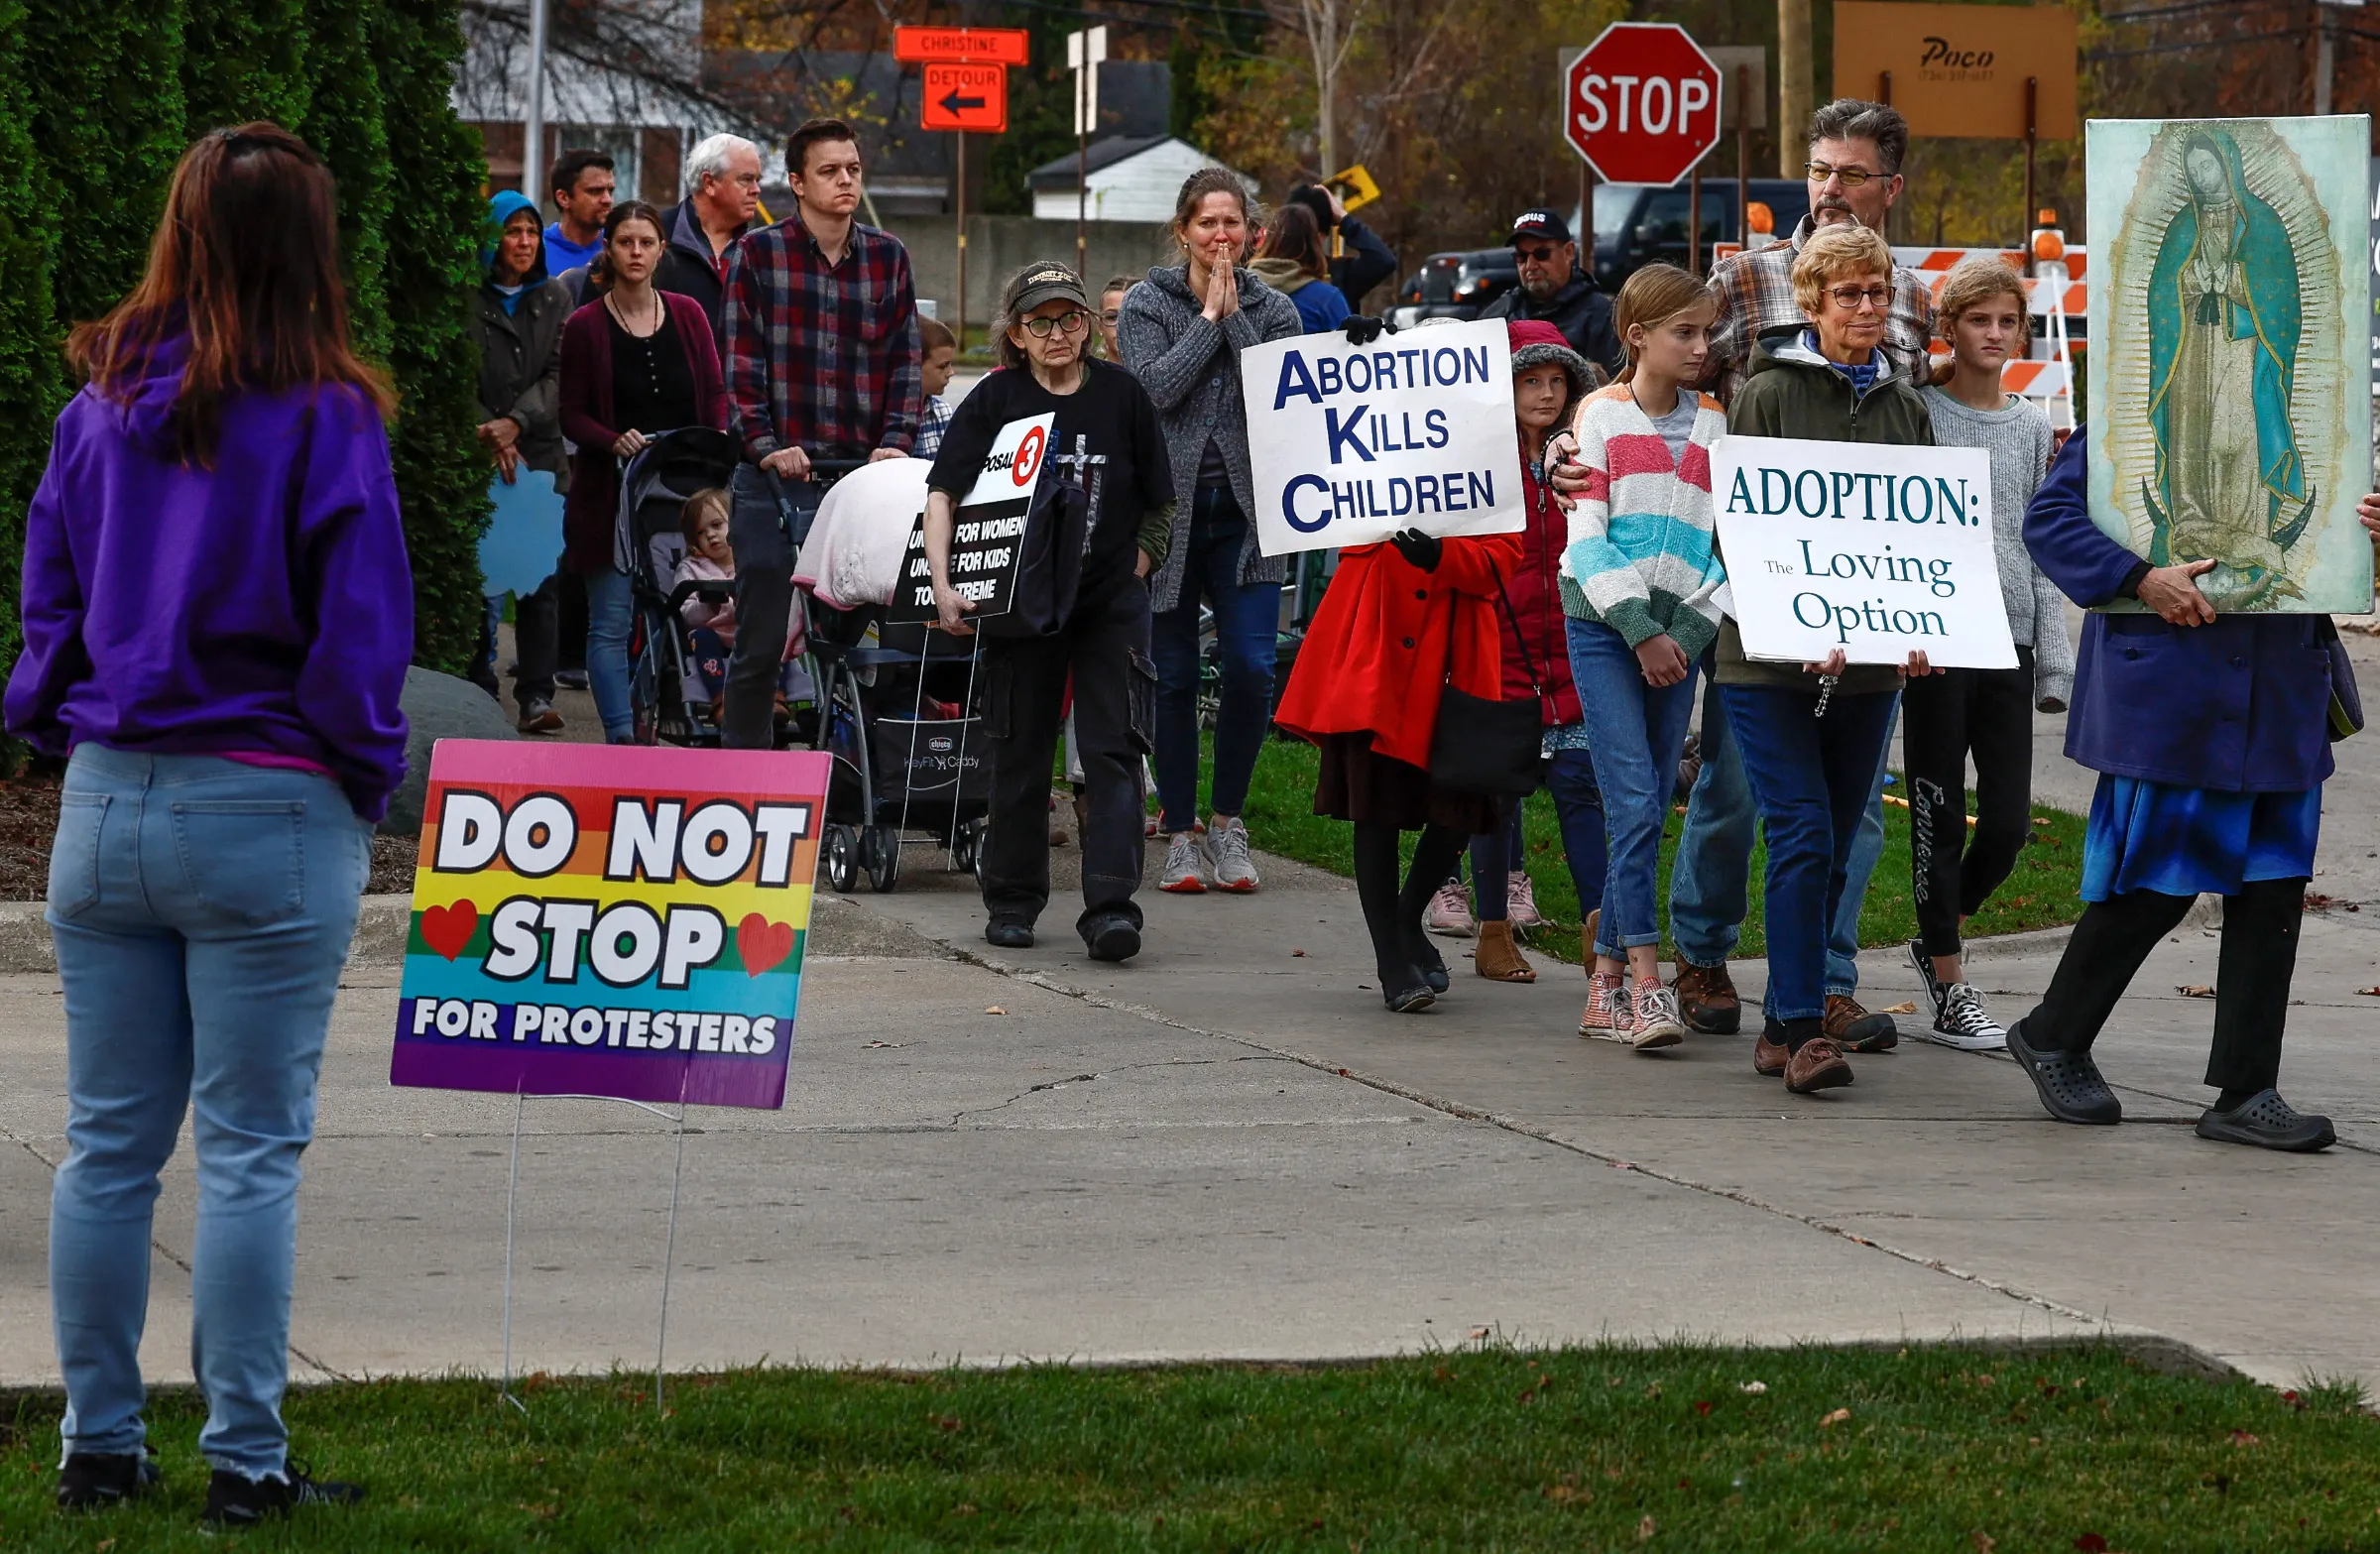 An abortion clinic escort watches Catholic groups pass Northland Family Planning during a prayer march to demonstrate against the ballot measure known as Proposal 3, which would codify the right to abortion, in Westland, Michigan, U.S., November 5, 2022